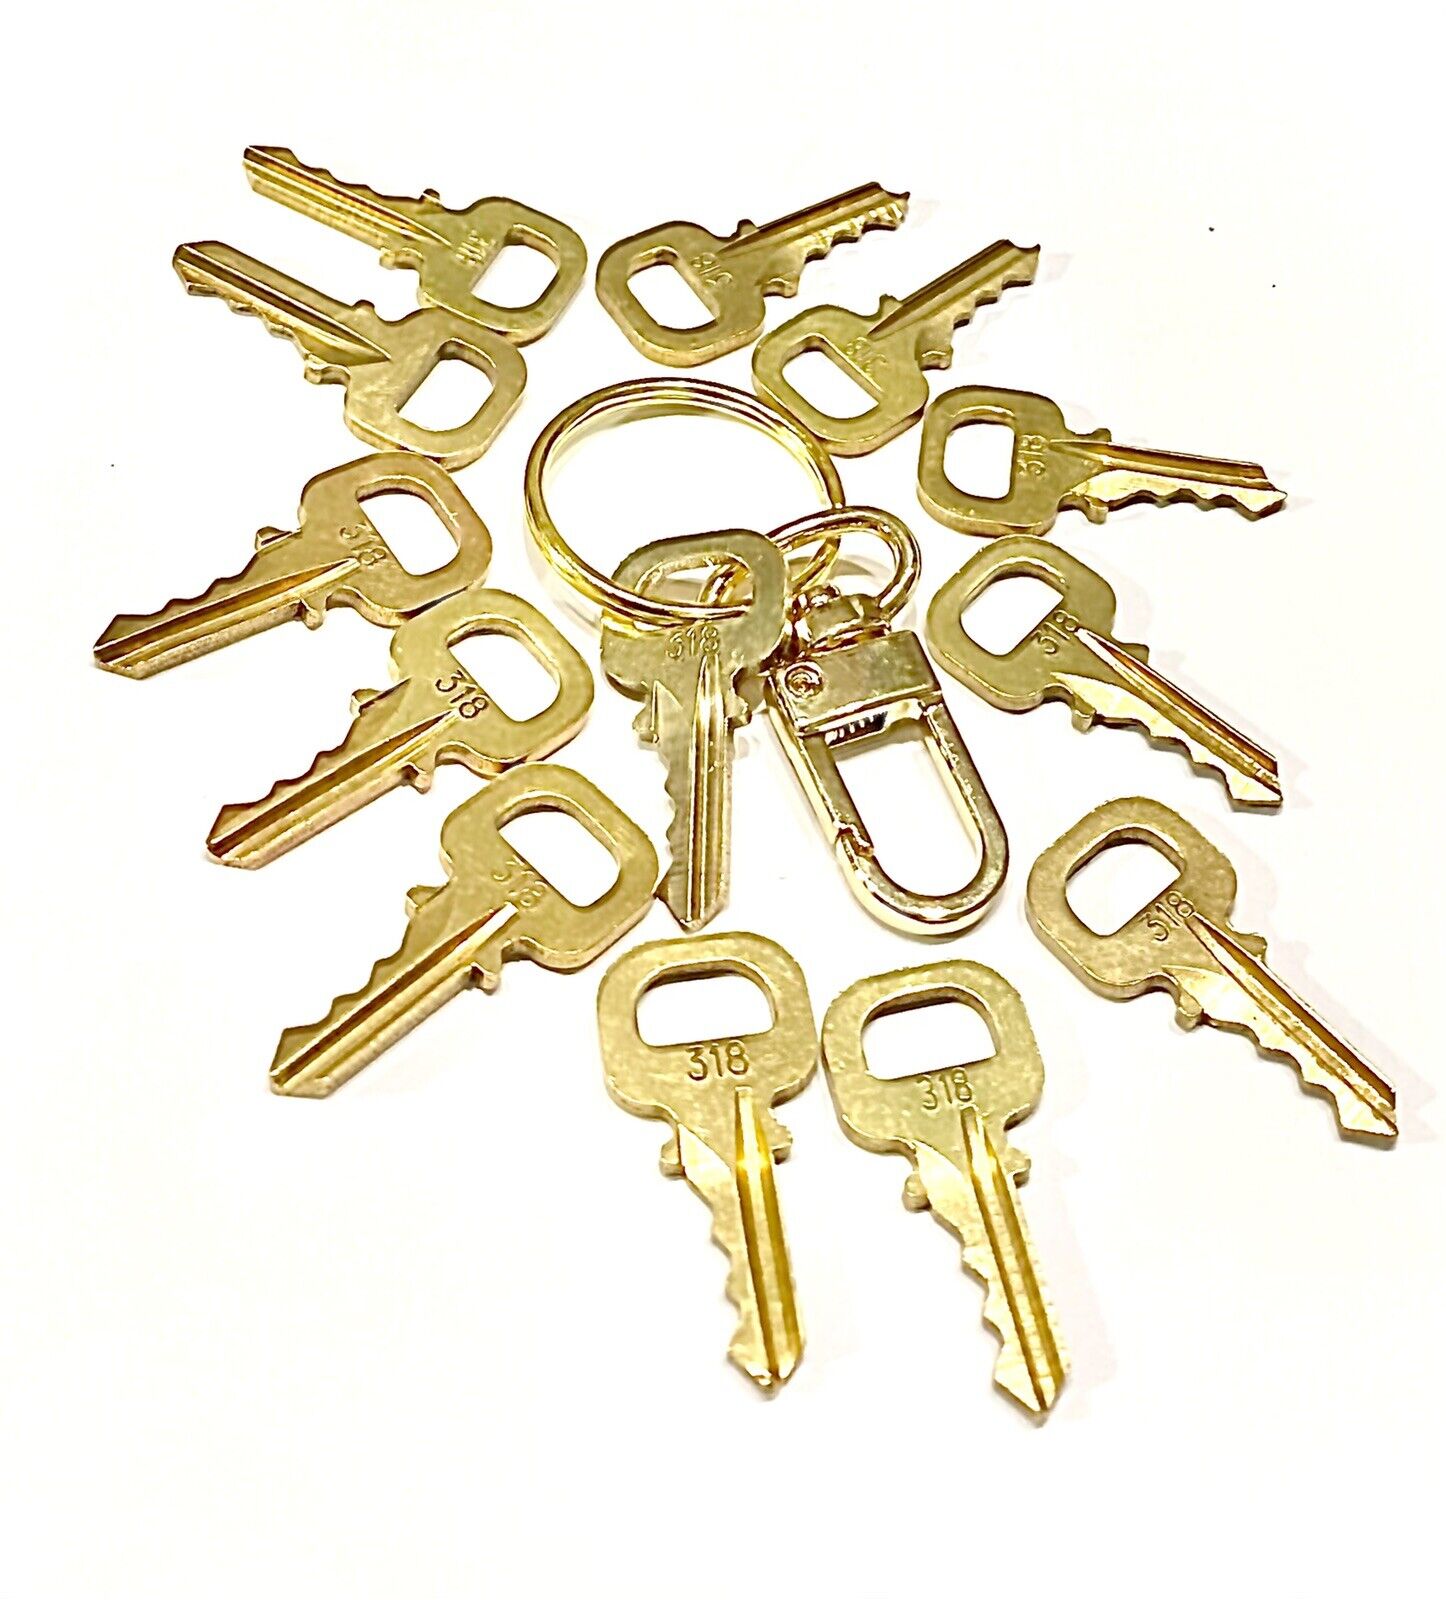 1 Pc Louis Vuitton Key 347 Brass Goldtone - Fits Authentic Lock Only